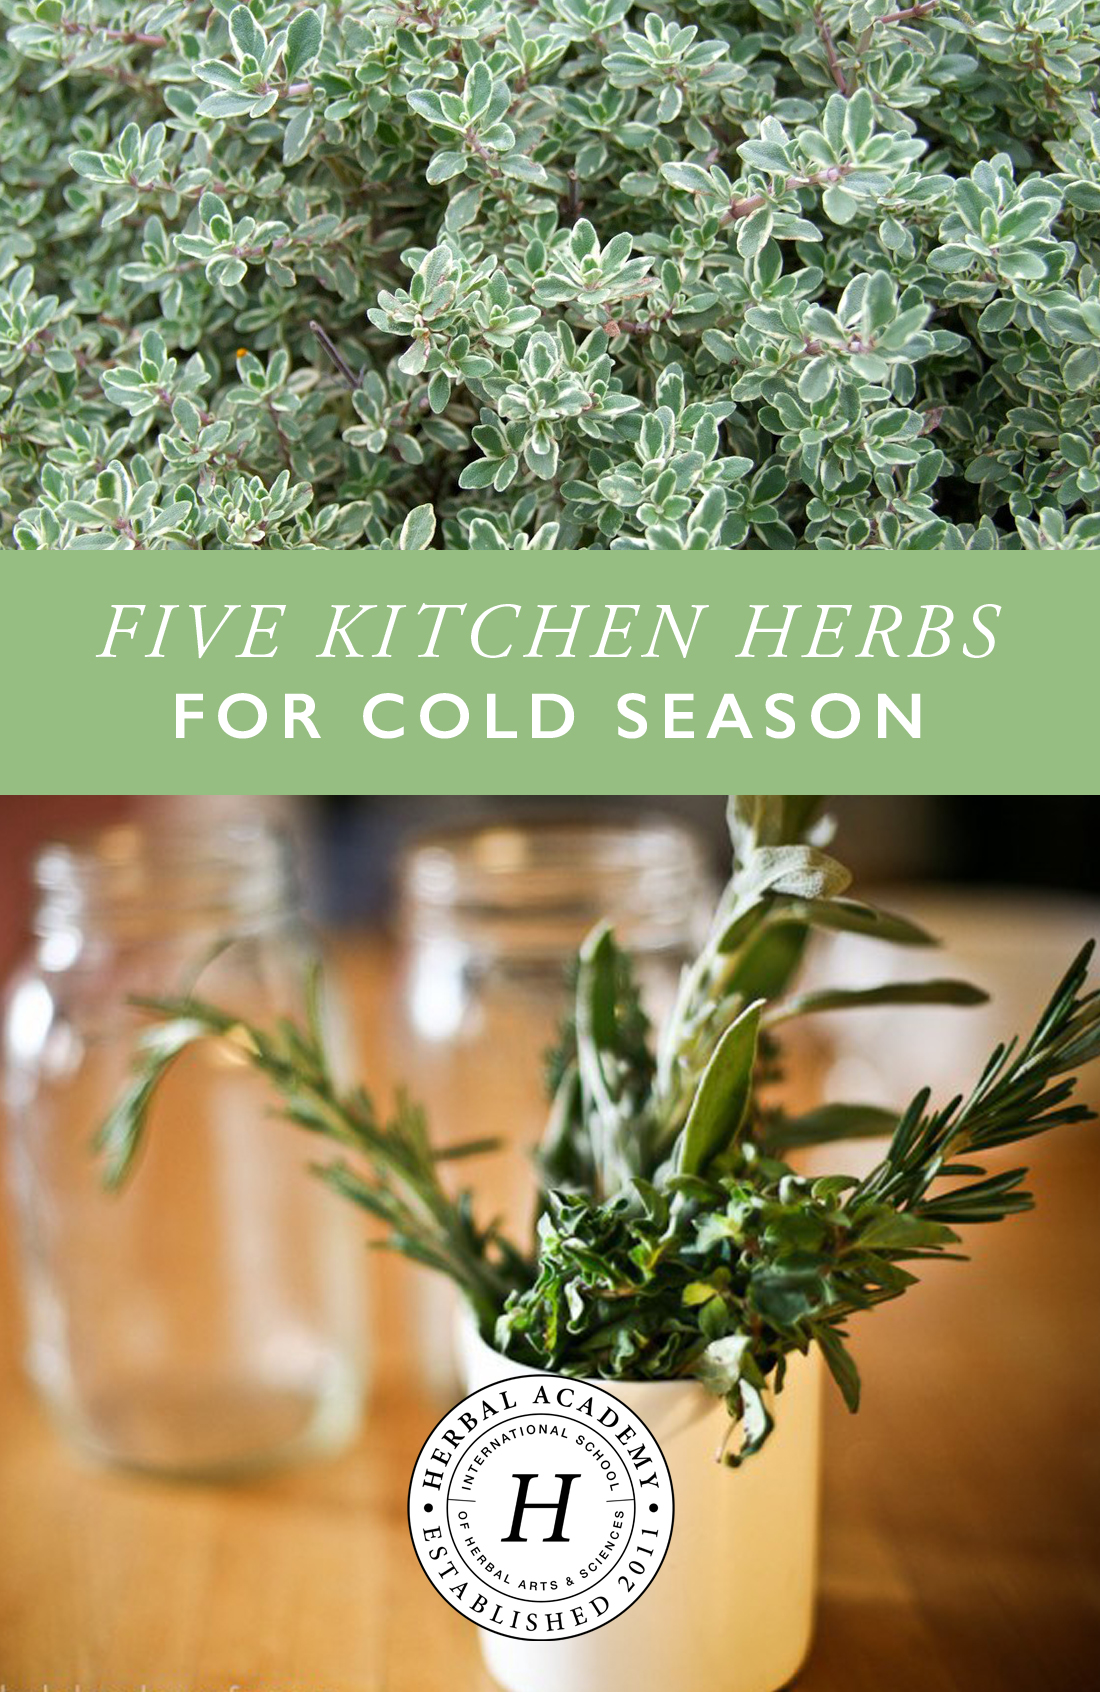 FIVE KITCHEN HERBS FOR COLD SEASON